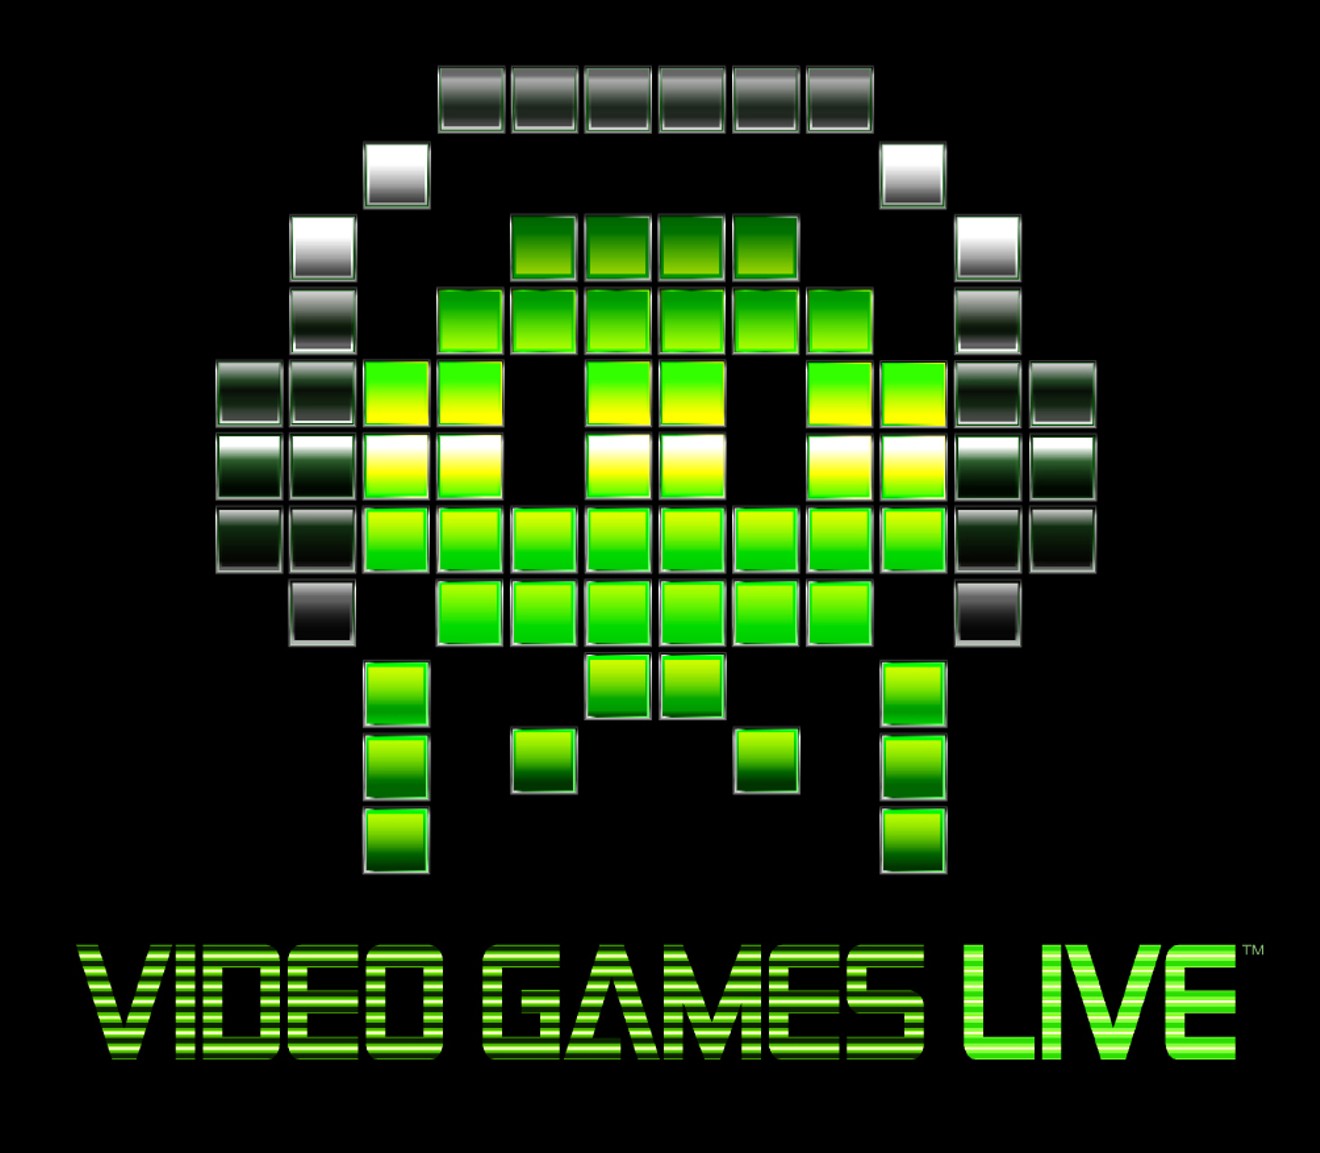 Video games have never been cooler than with Video Games Live, an immersive experience complete with music, lights and videos.